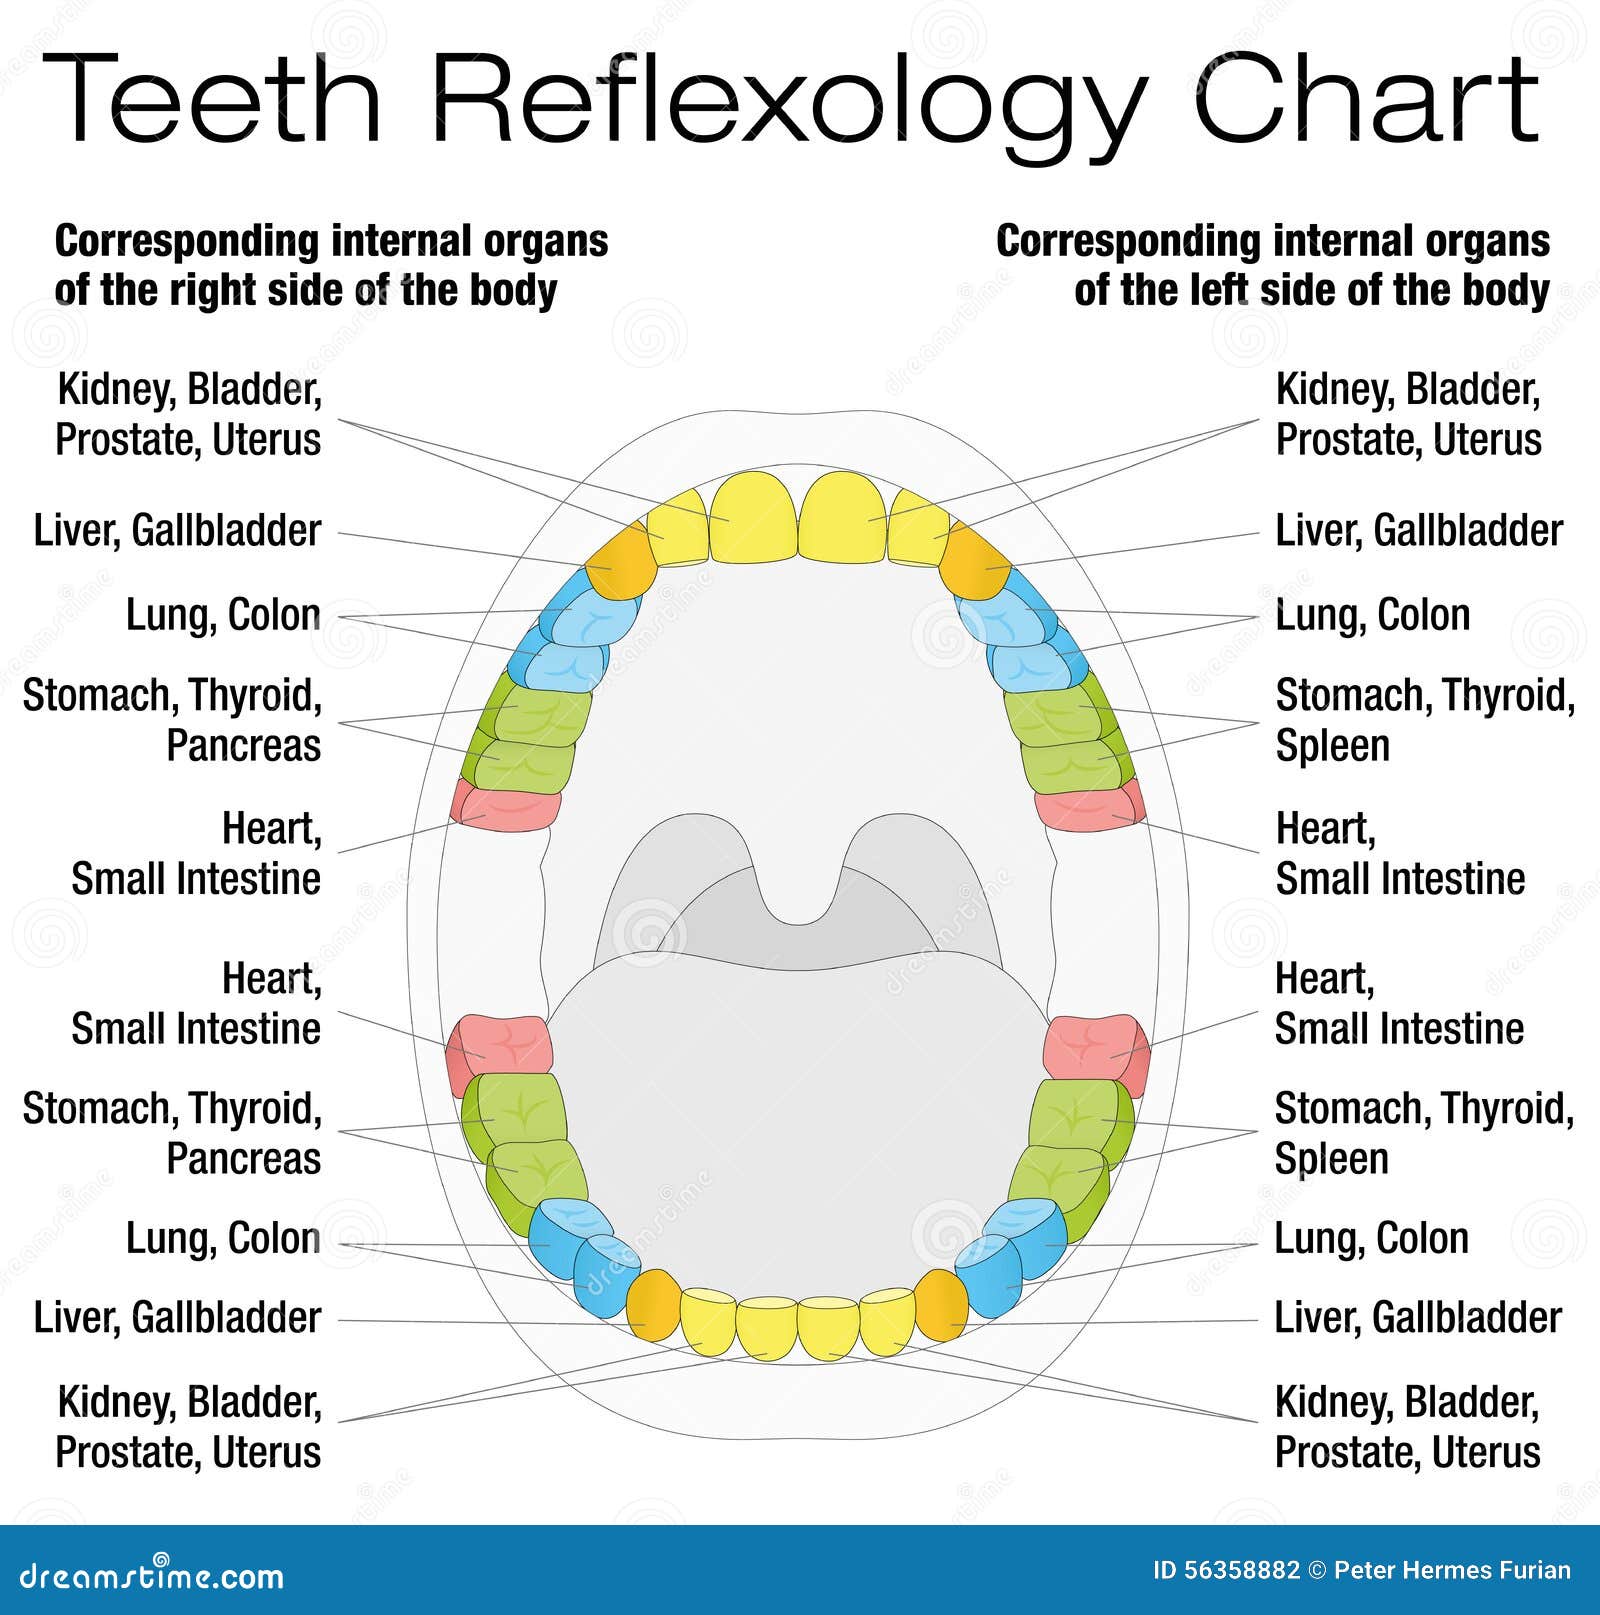 Where can you download dental tooth charts?